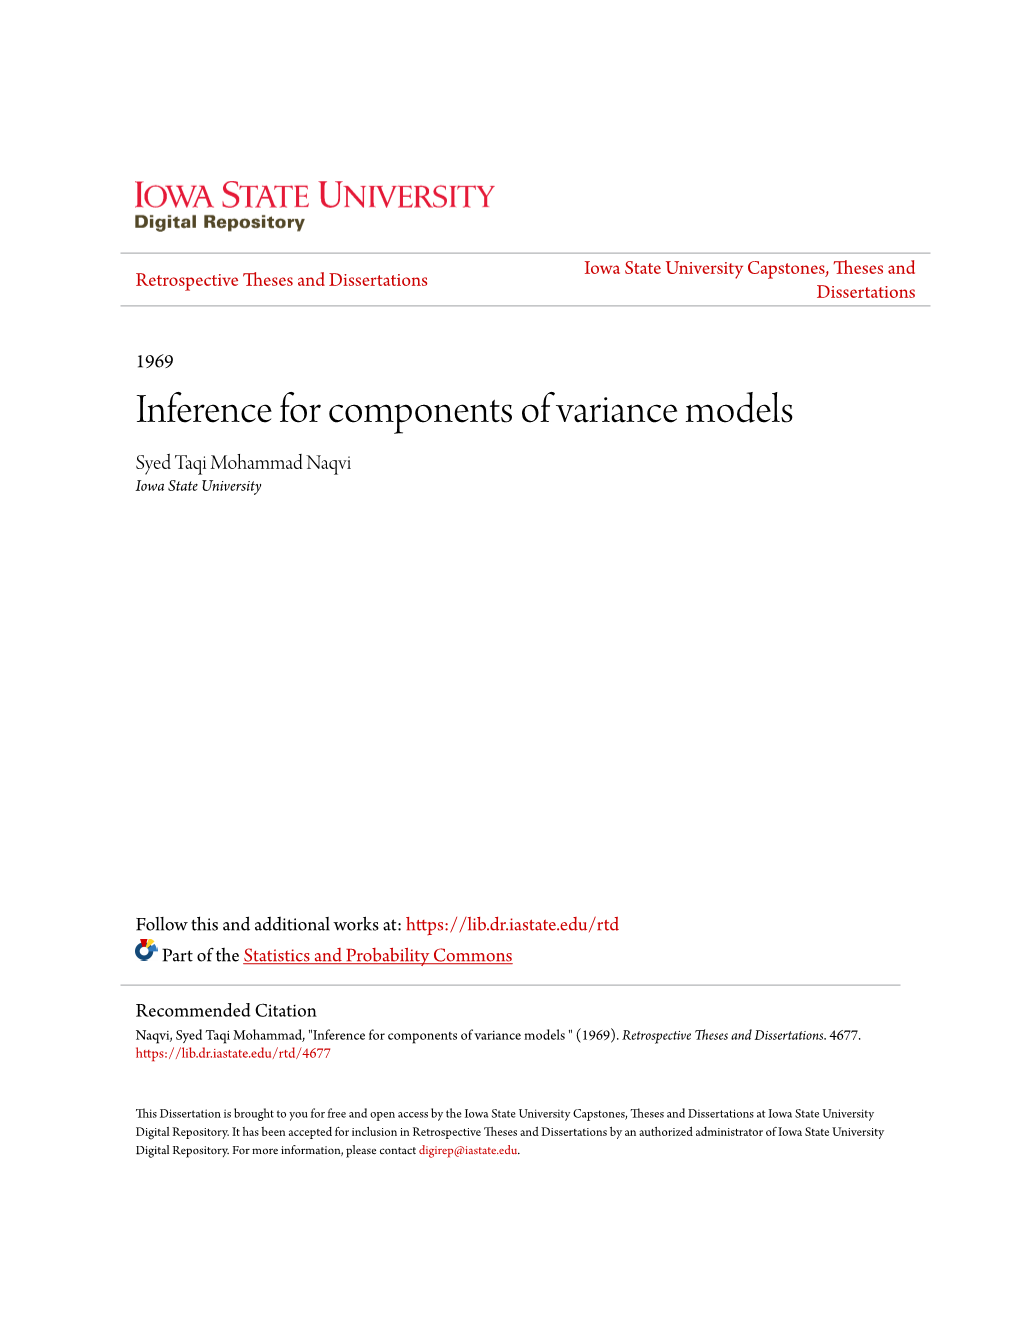 Inference for Components of Variance Models Syed Taqi Mohammad Naqvi Iowa State University